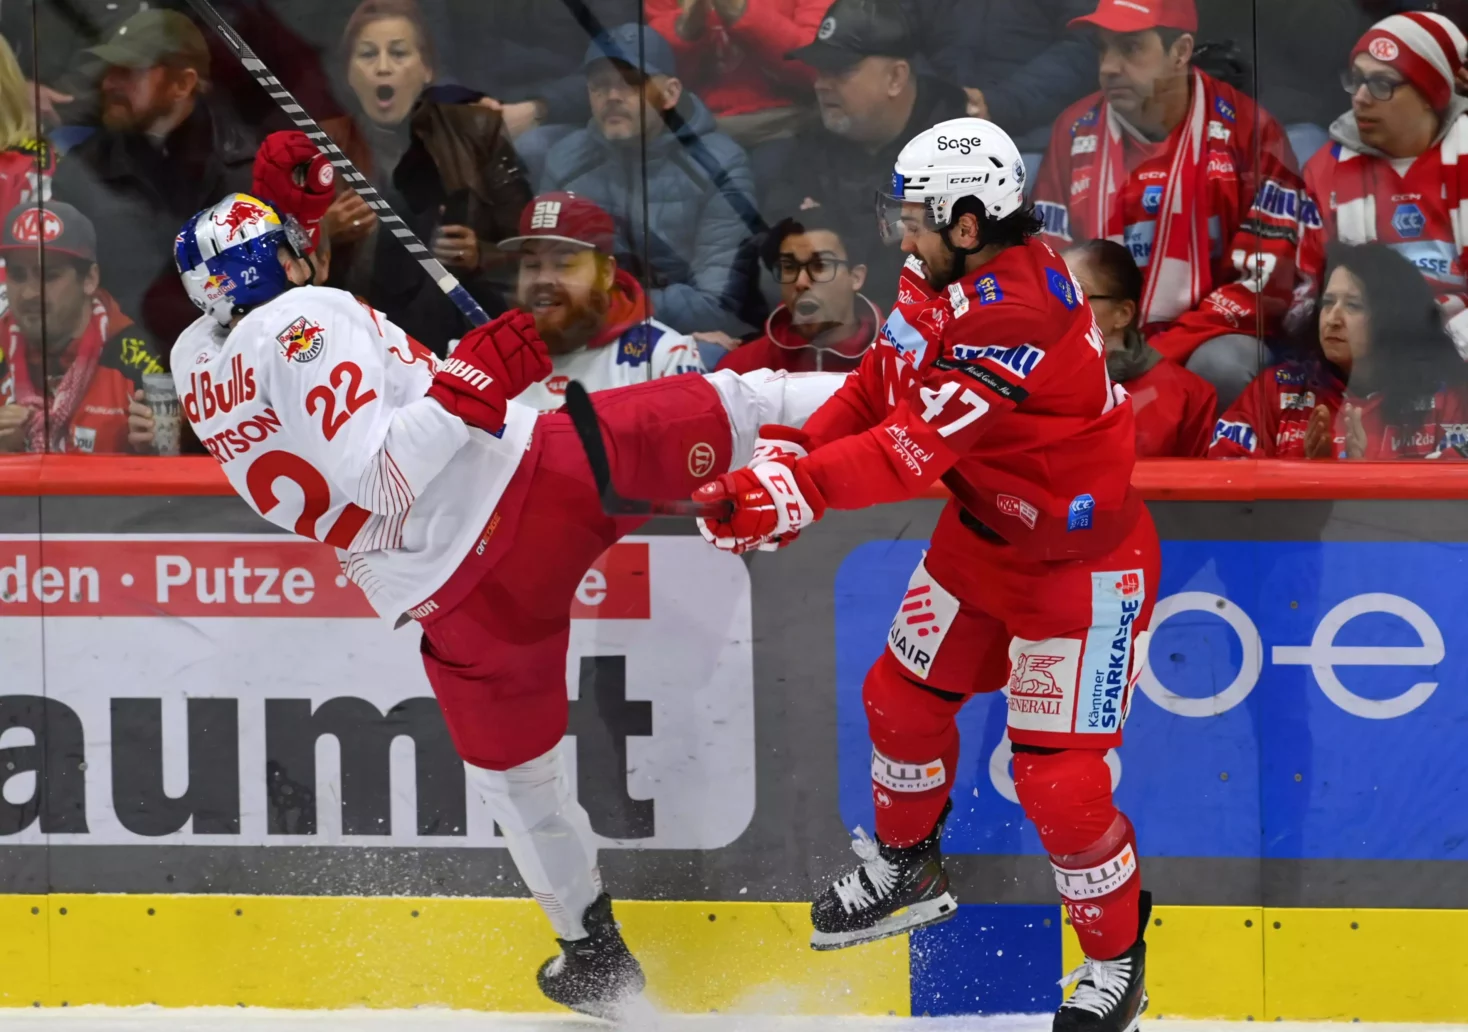 The photo on 5min.at shows an ice hockey match between EC KAC and EC Salzburg.